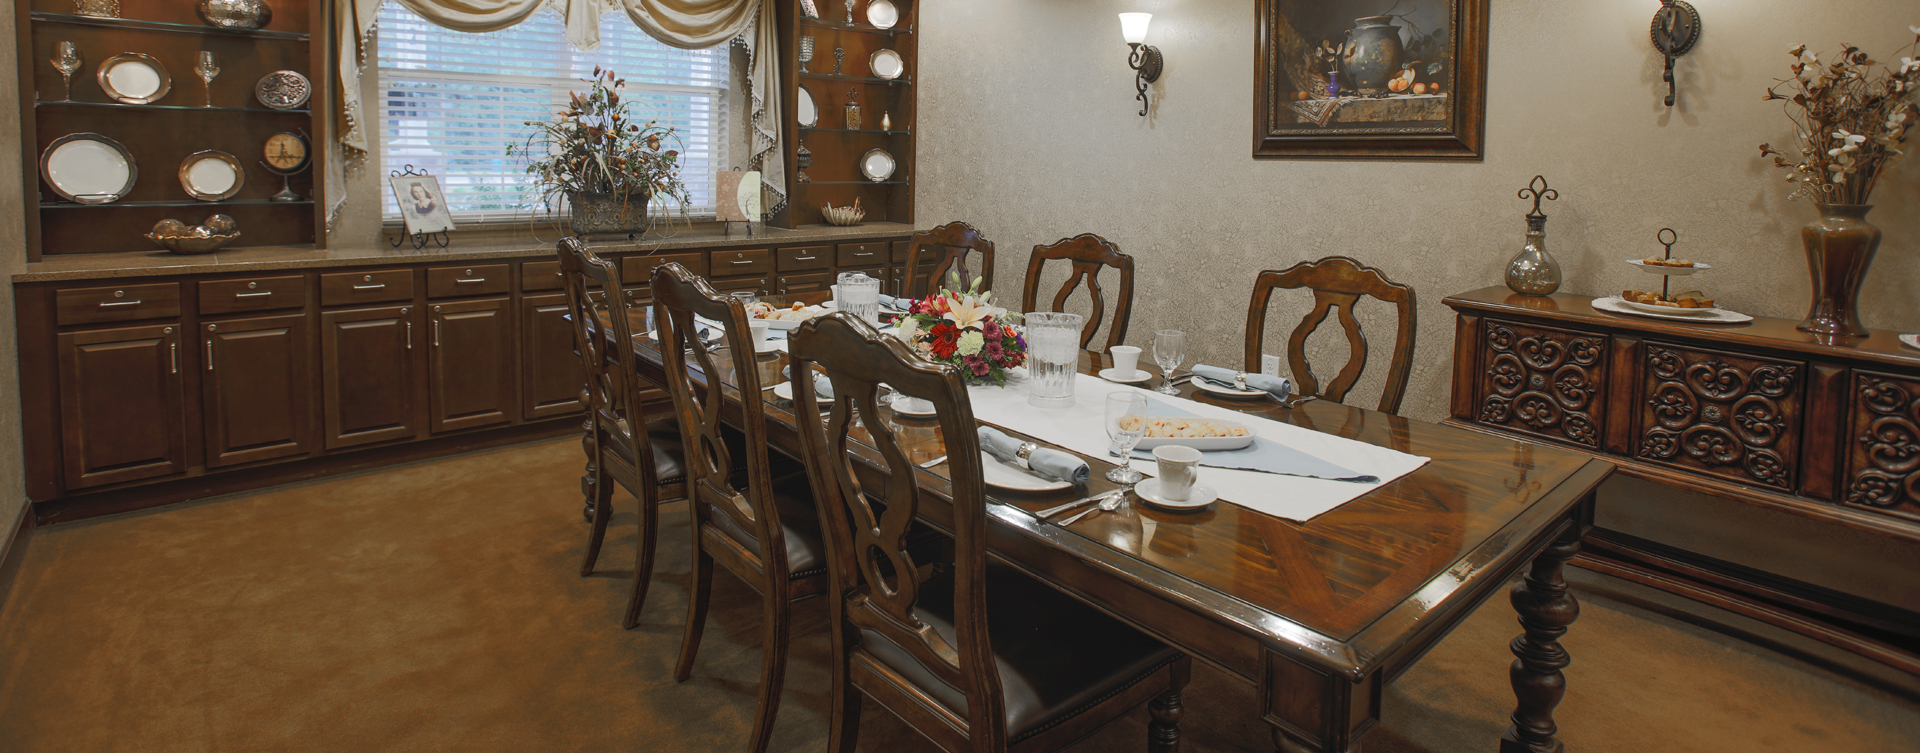 Celebrate special occasions in the private dining room at Bickford of Carmel